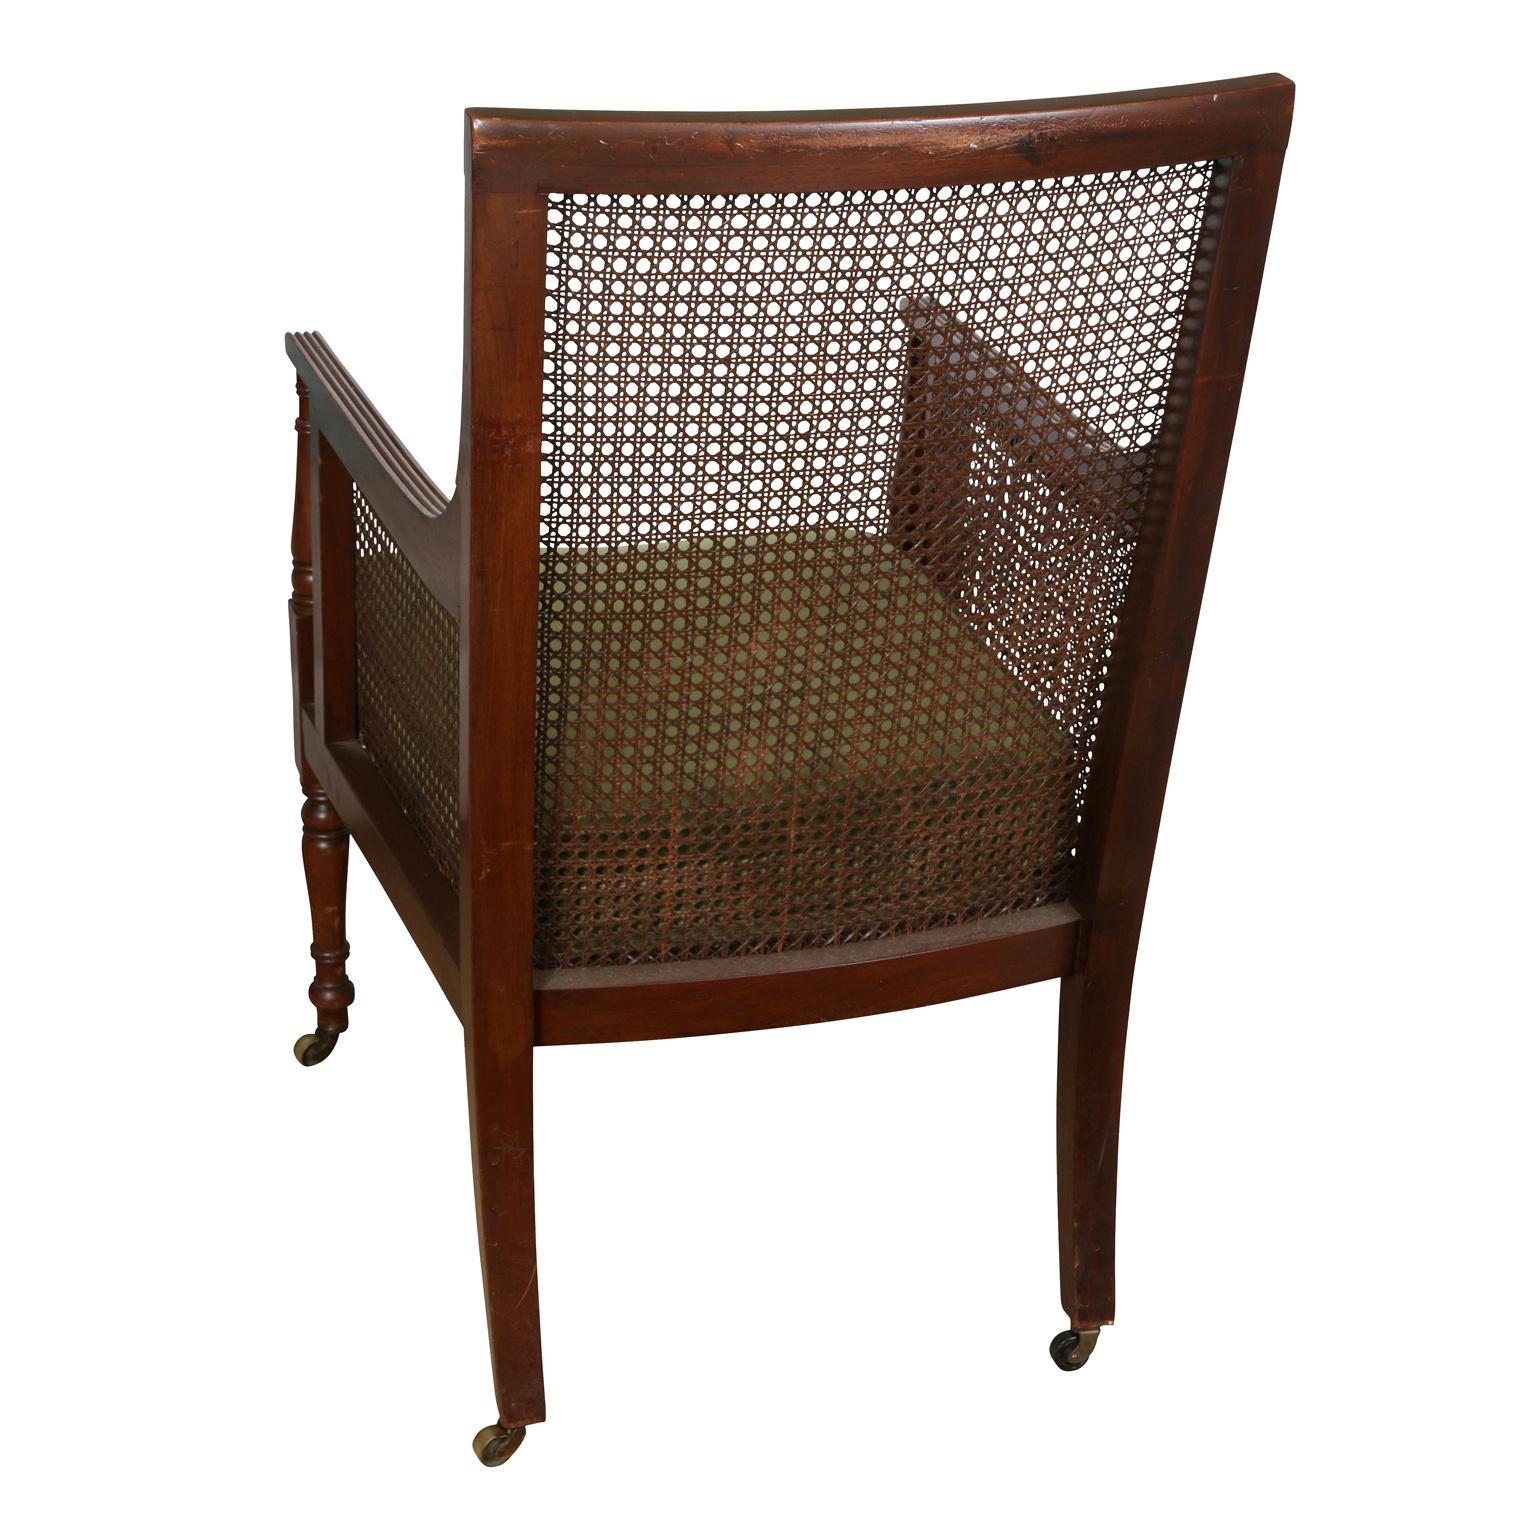 Regency Style Caned Library Chair With Green Velvet Seat In Good Condition For Sale In Locust Valley, NY